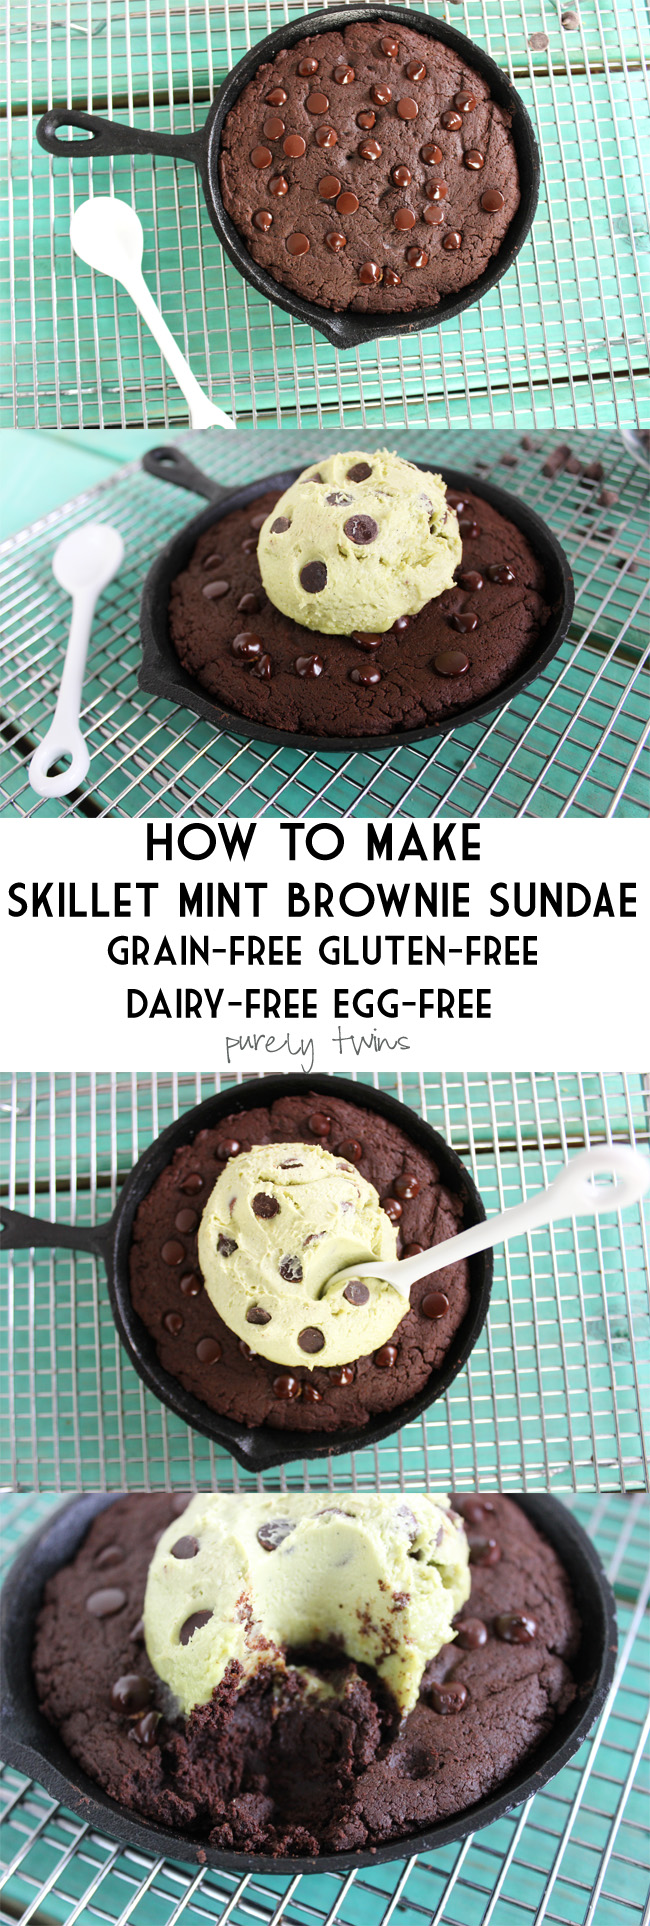 amazing-healthy-chocolate-mint-brownies-paleo-grain-free-purelytiwns